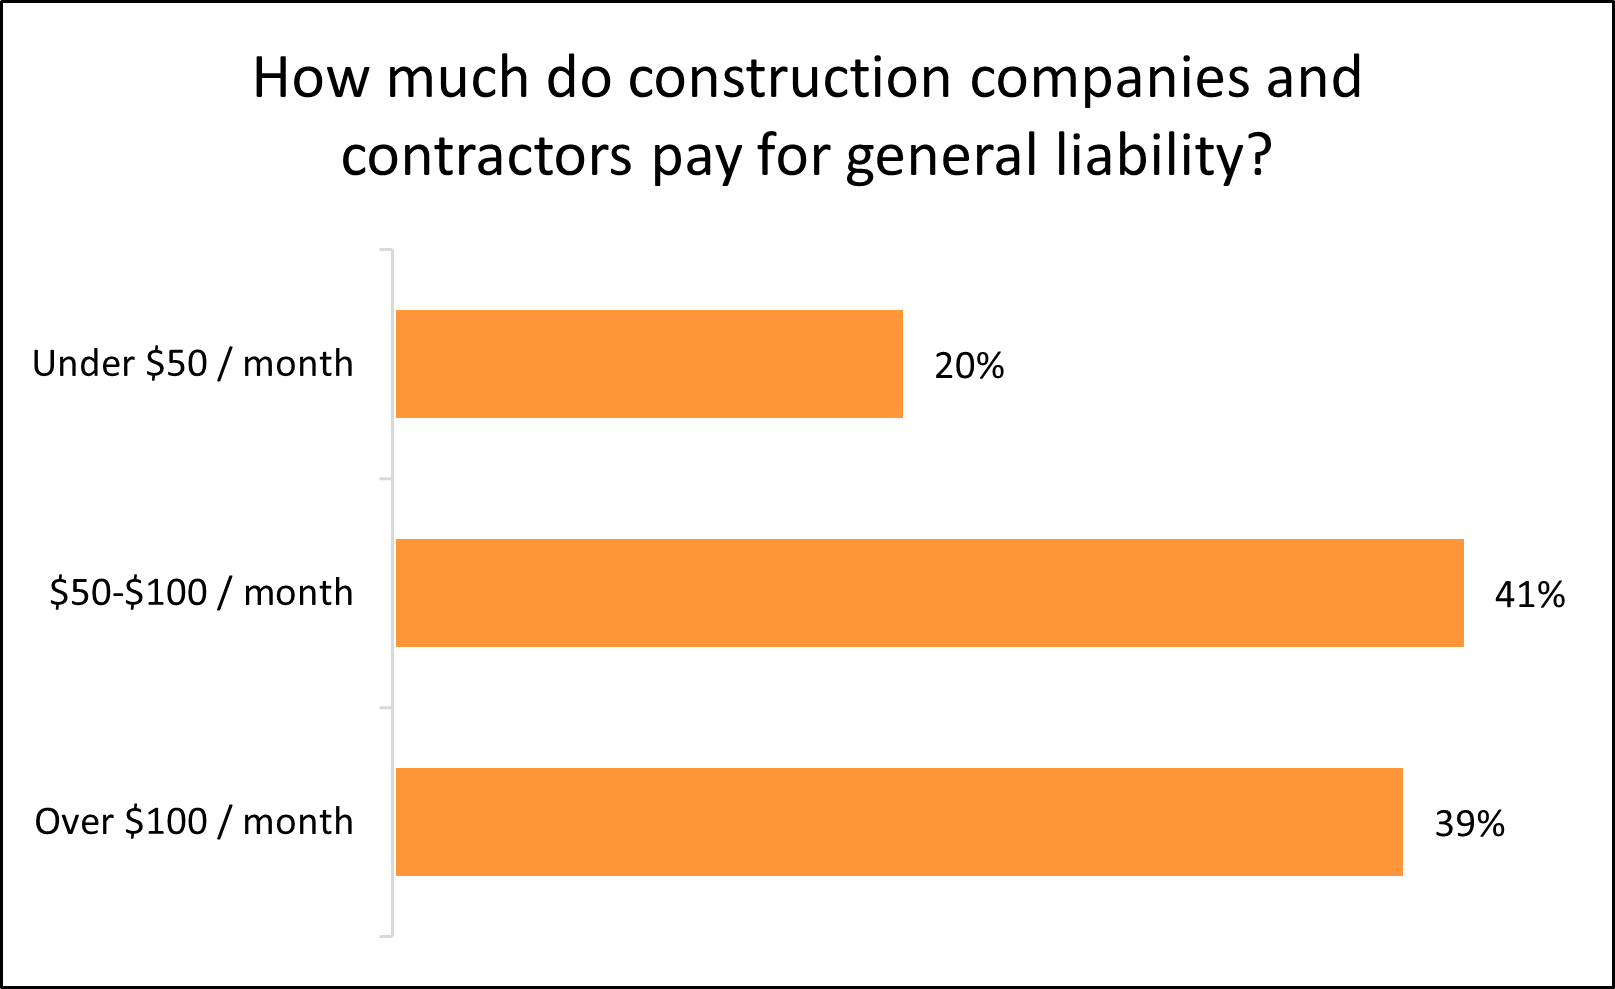 How much do construction companies and contractors pay for general liability insurance with Insureon?